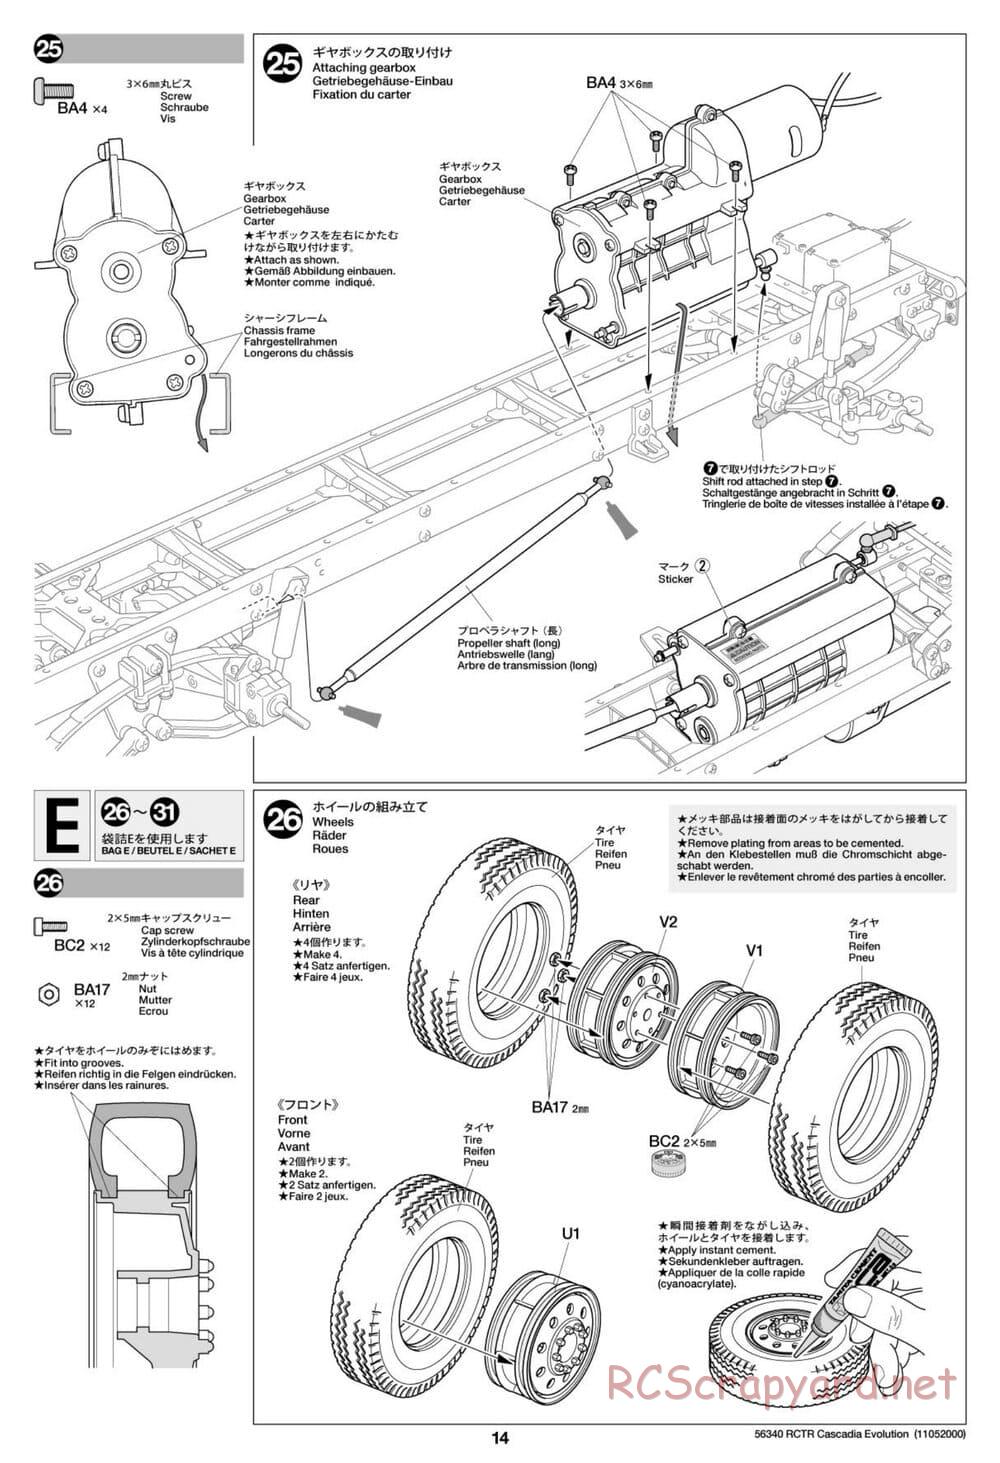 Tamiya - Freightliner Cascadia Evolution Tractor Truck Chassis - Manual - Page 14